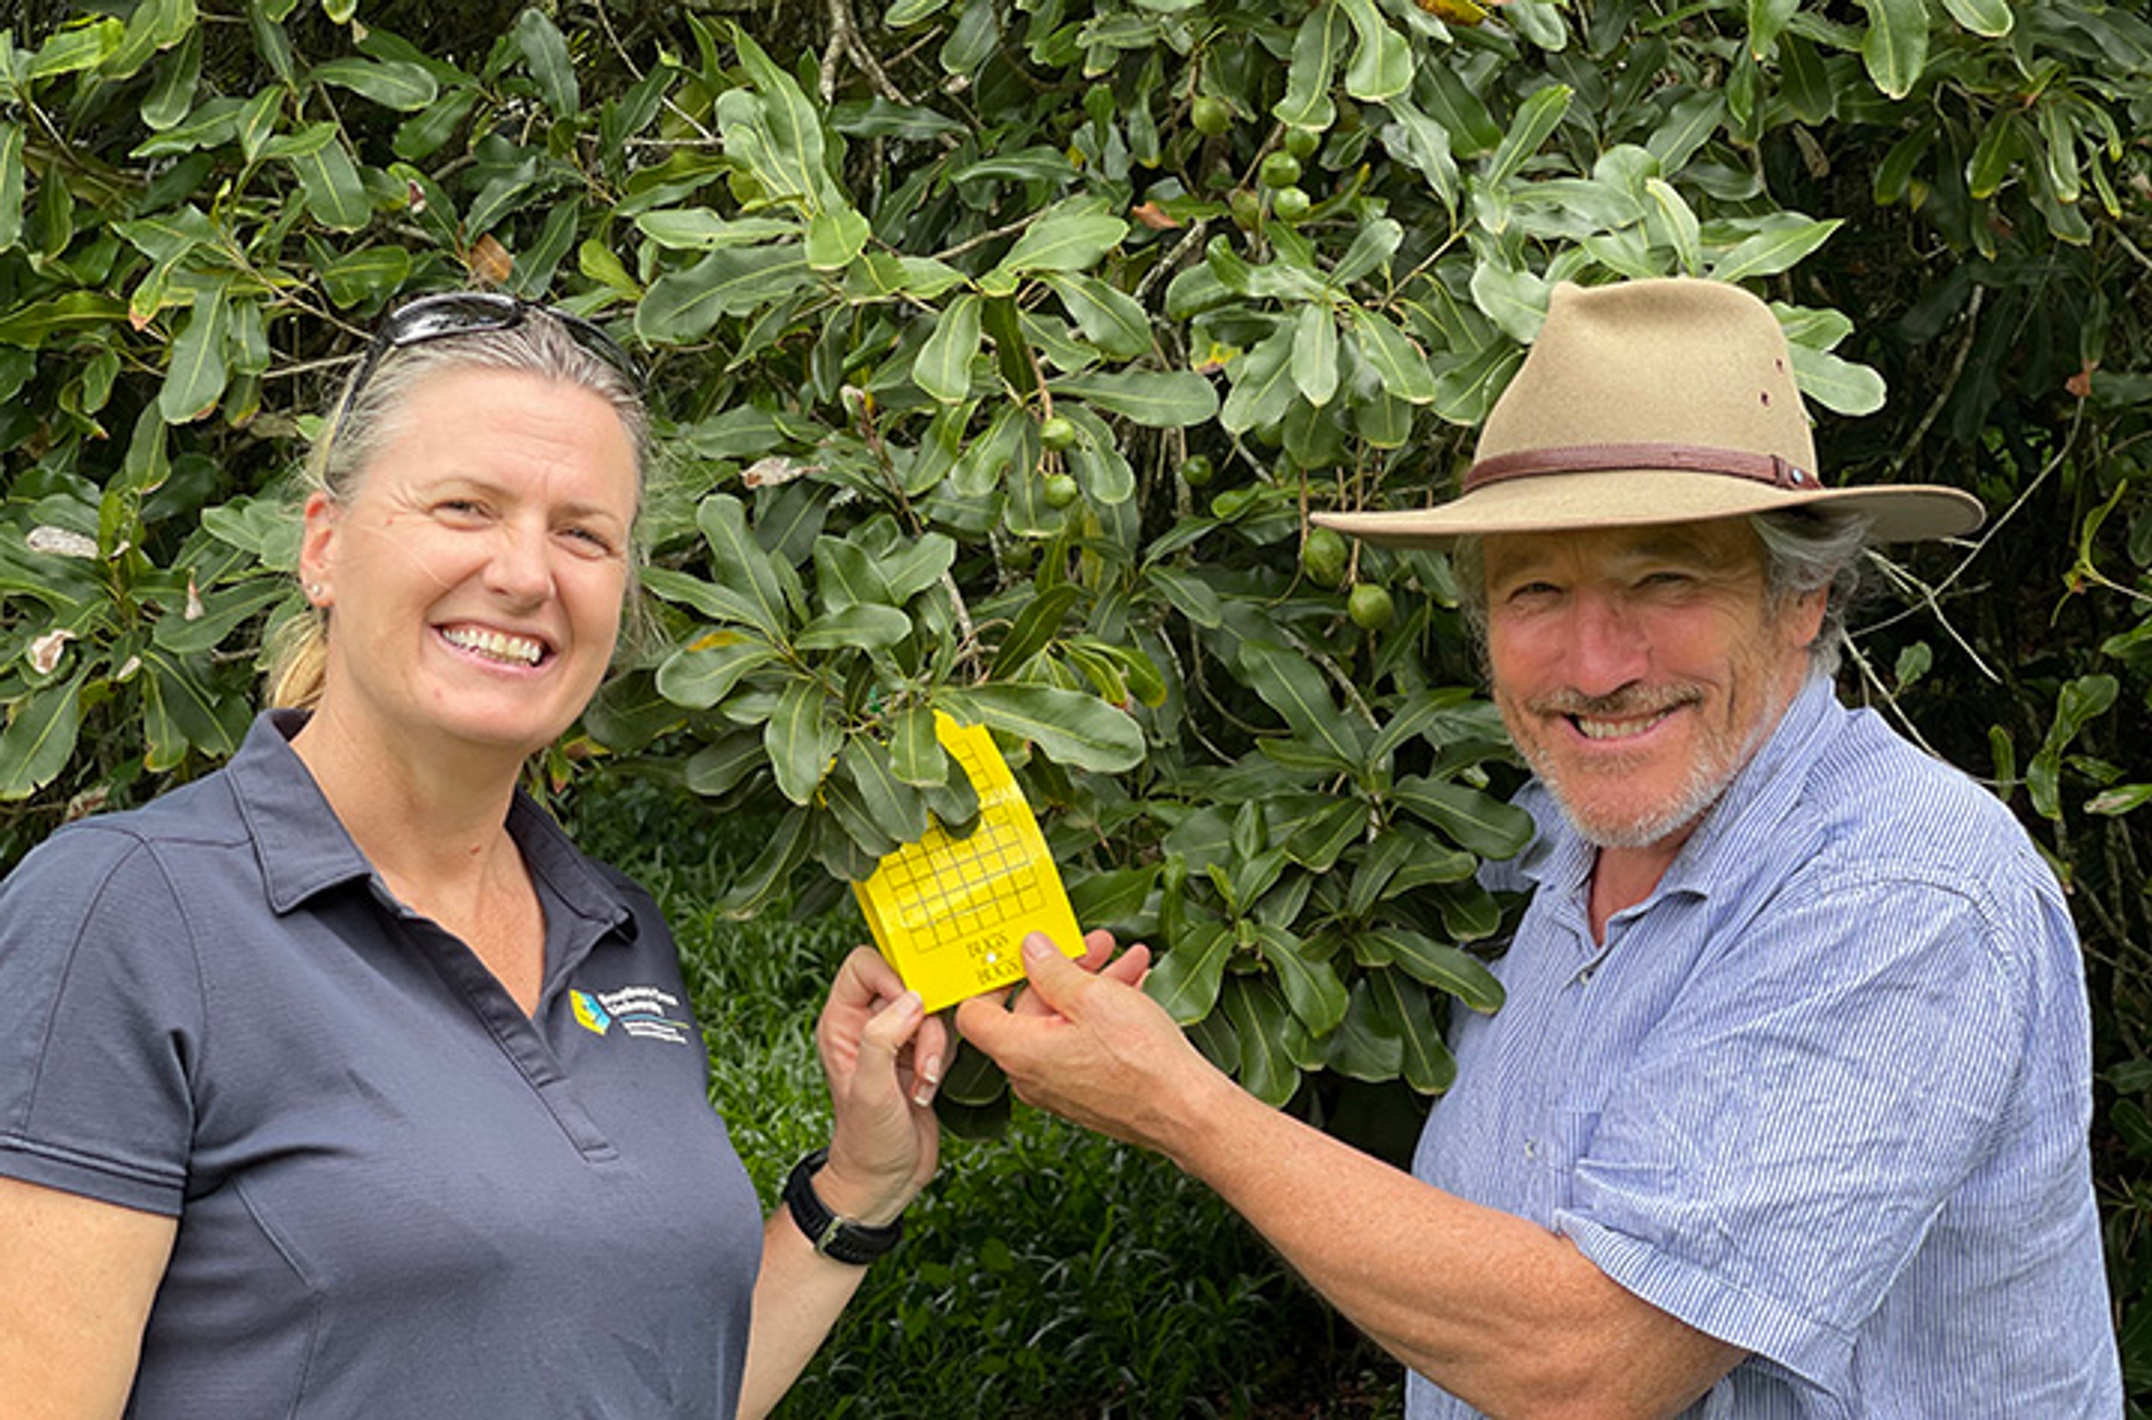 A man and woman check stick traps for macadamia lace bug